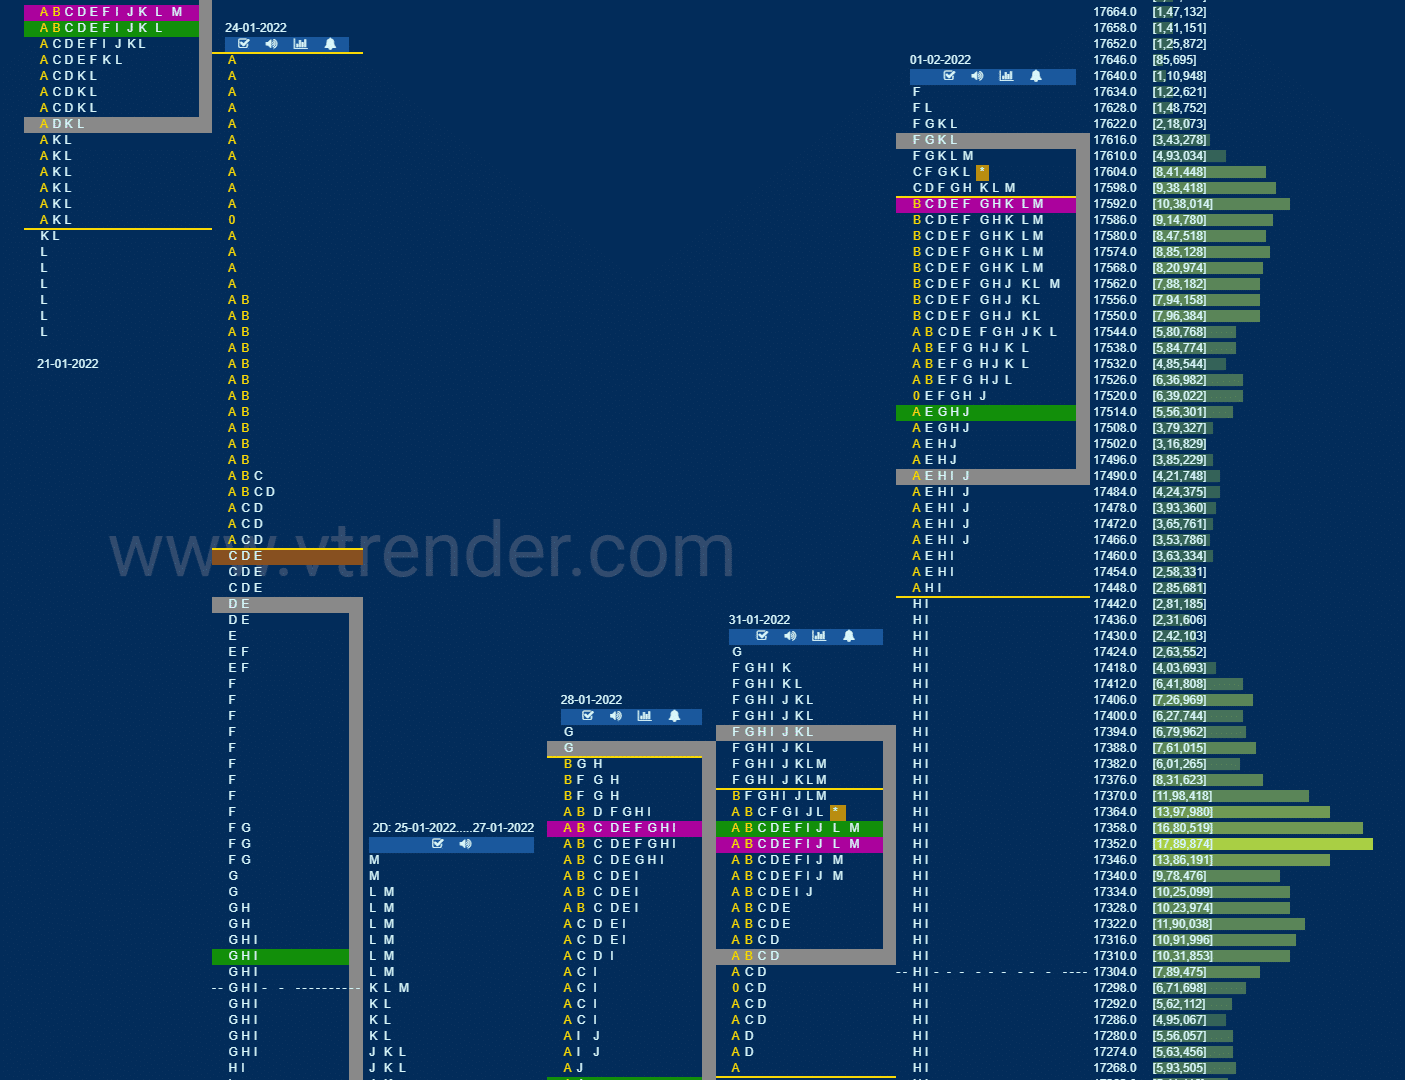 Nf Market Profile Analysis Dated 01St February 2022 Banknifty Futures, Charts, Day Trading, Intraday Trading, Intraday Trading Strategies, Market Profile, Market Profile Trading Strategies, Nifty Futures, Order Flow Analysis, Support And Resistance, Technical Analysis, Trading Strategies, Volume Profile Trading